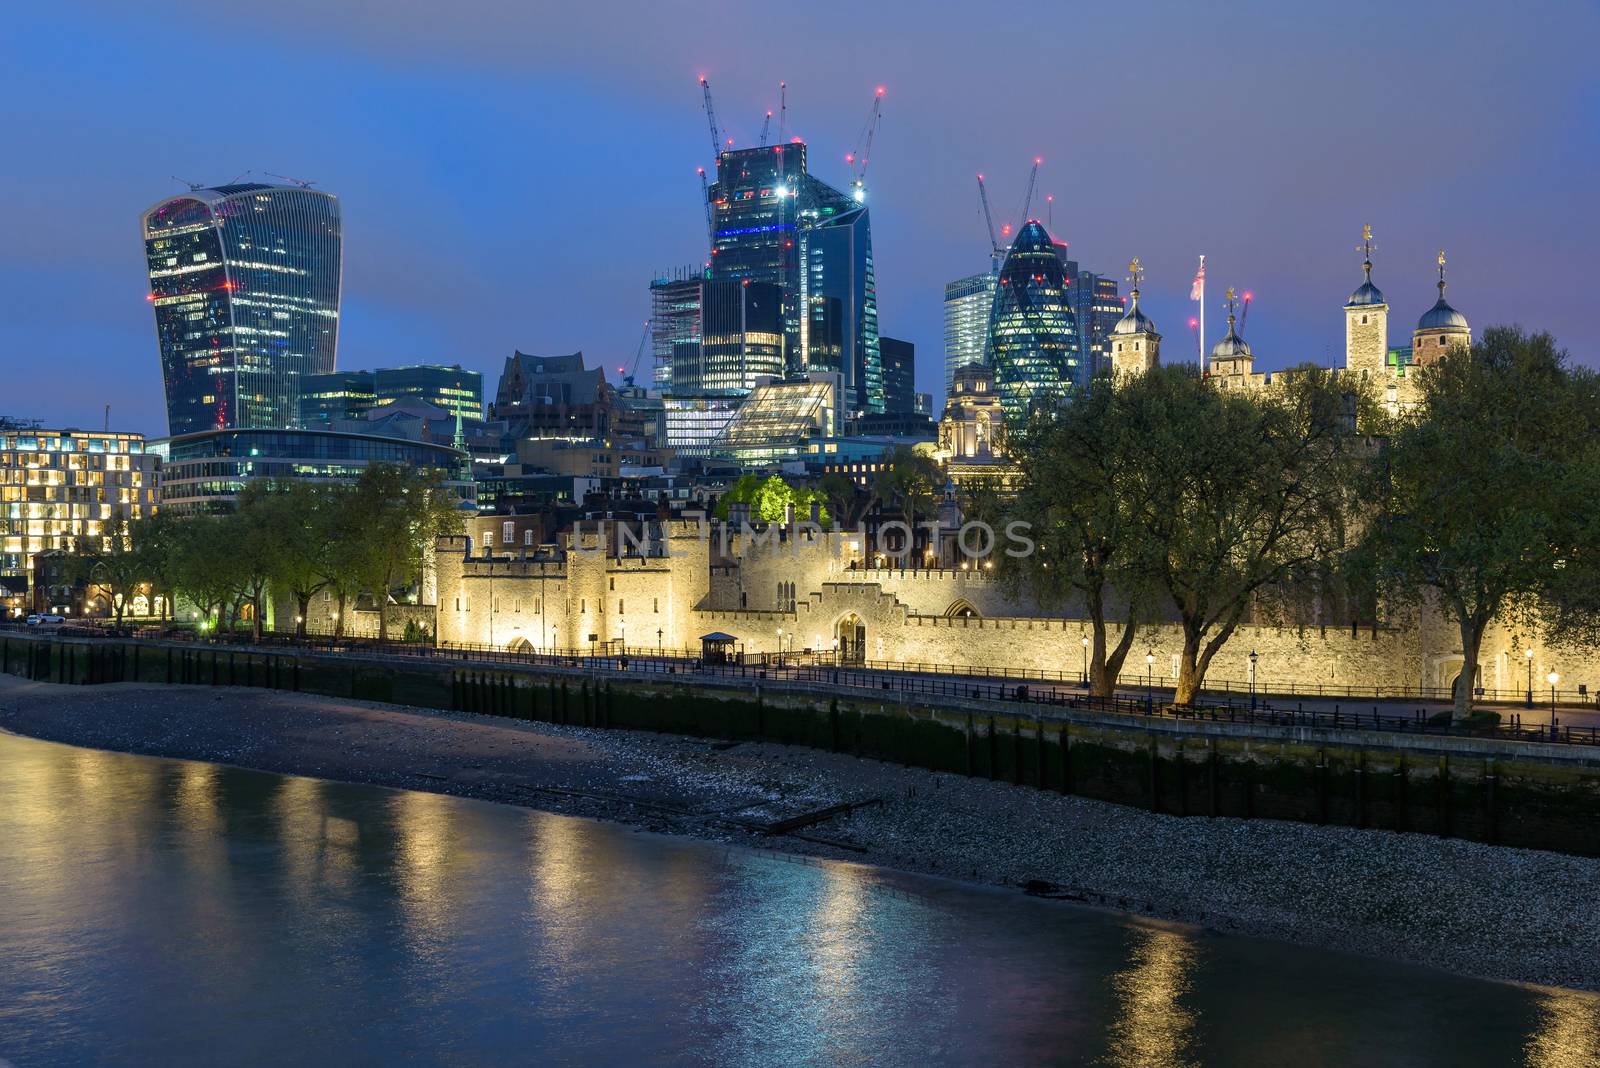 London skyline at cloudy night by mkos83